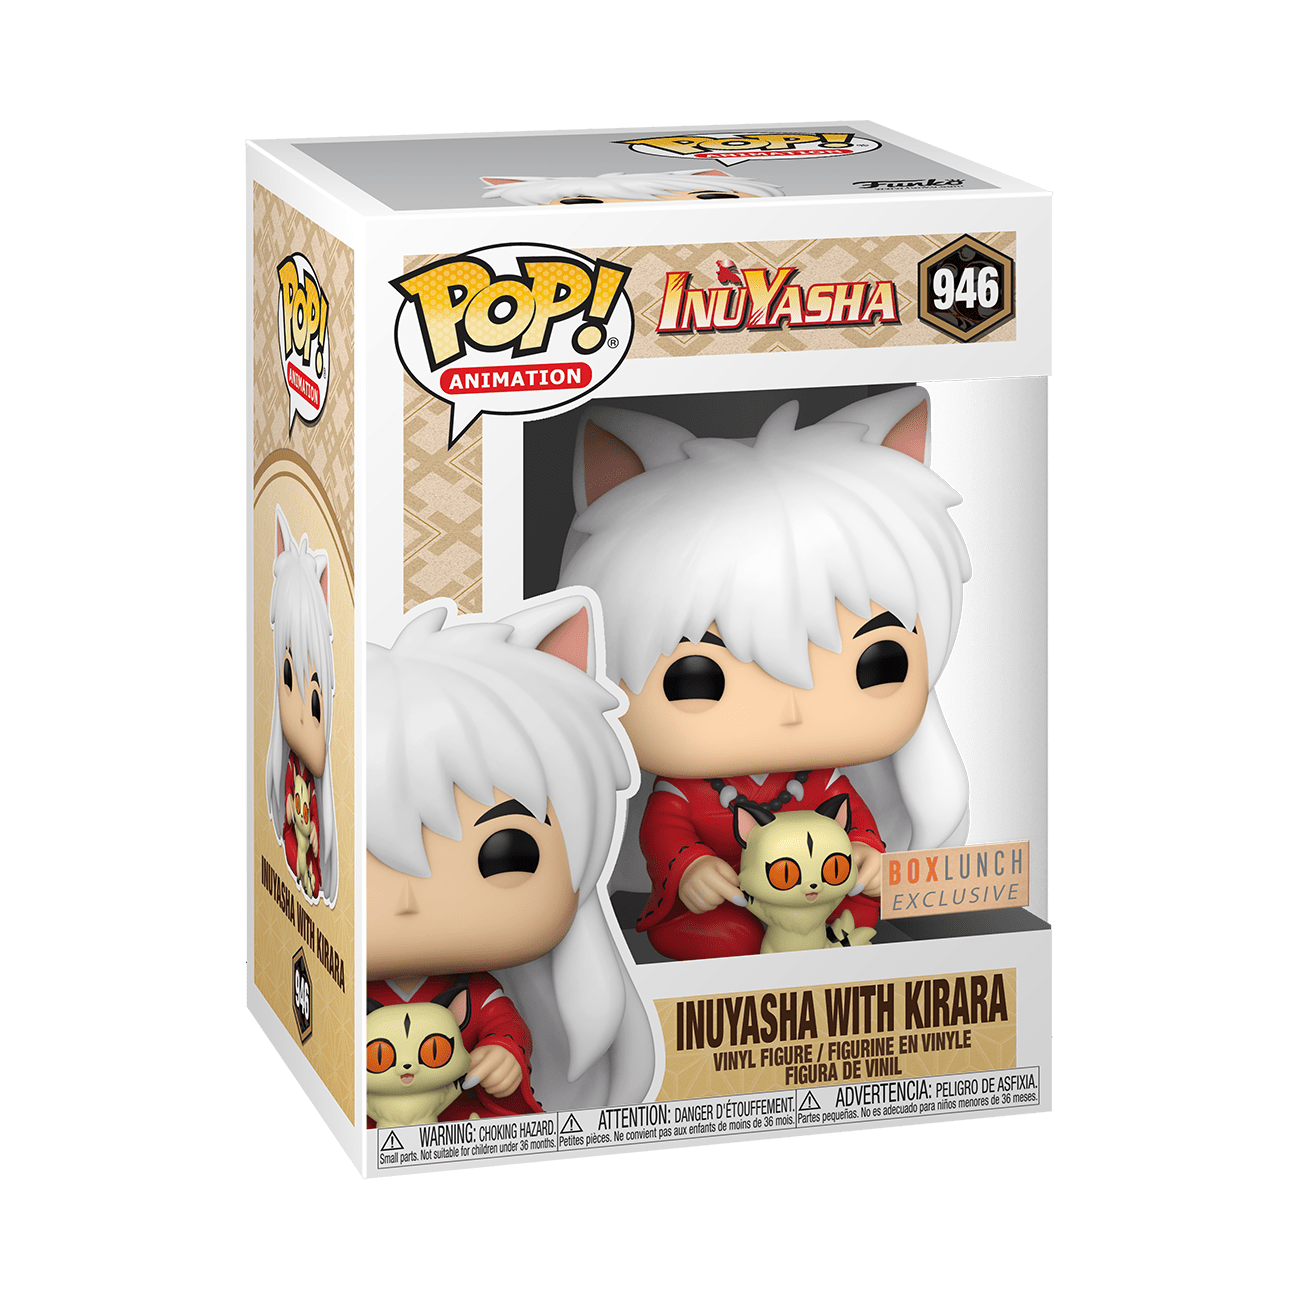 A new POP from Inuyasha with Kirara